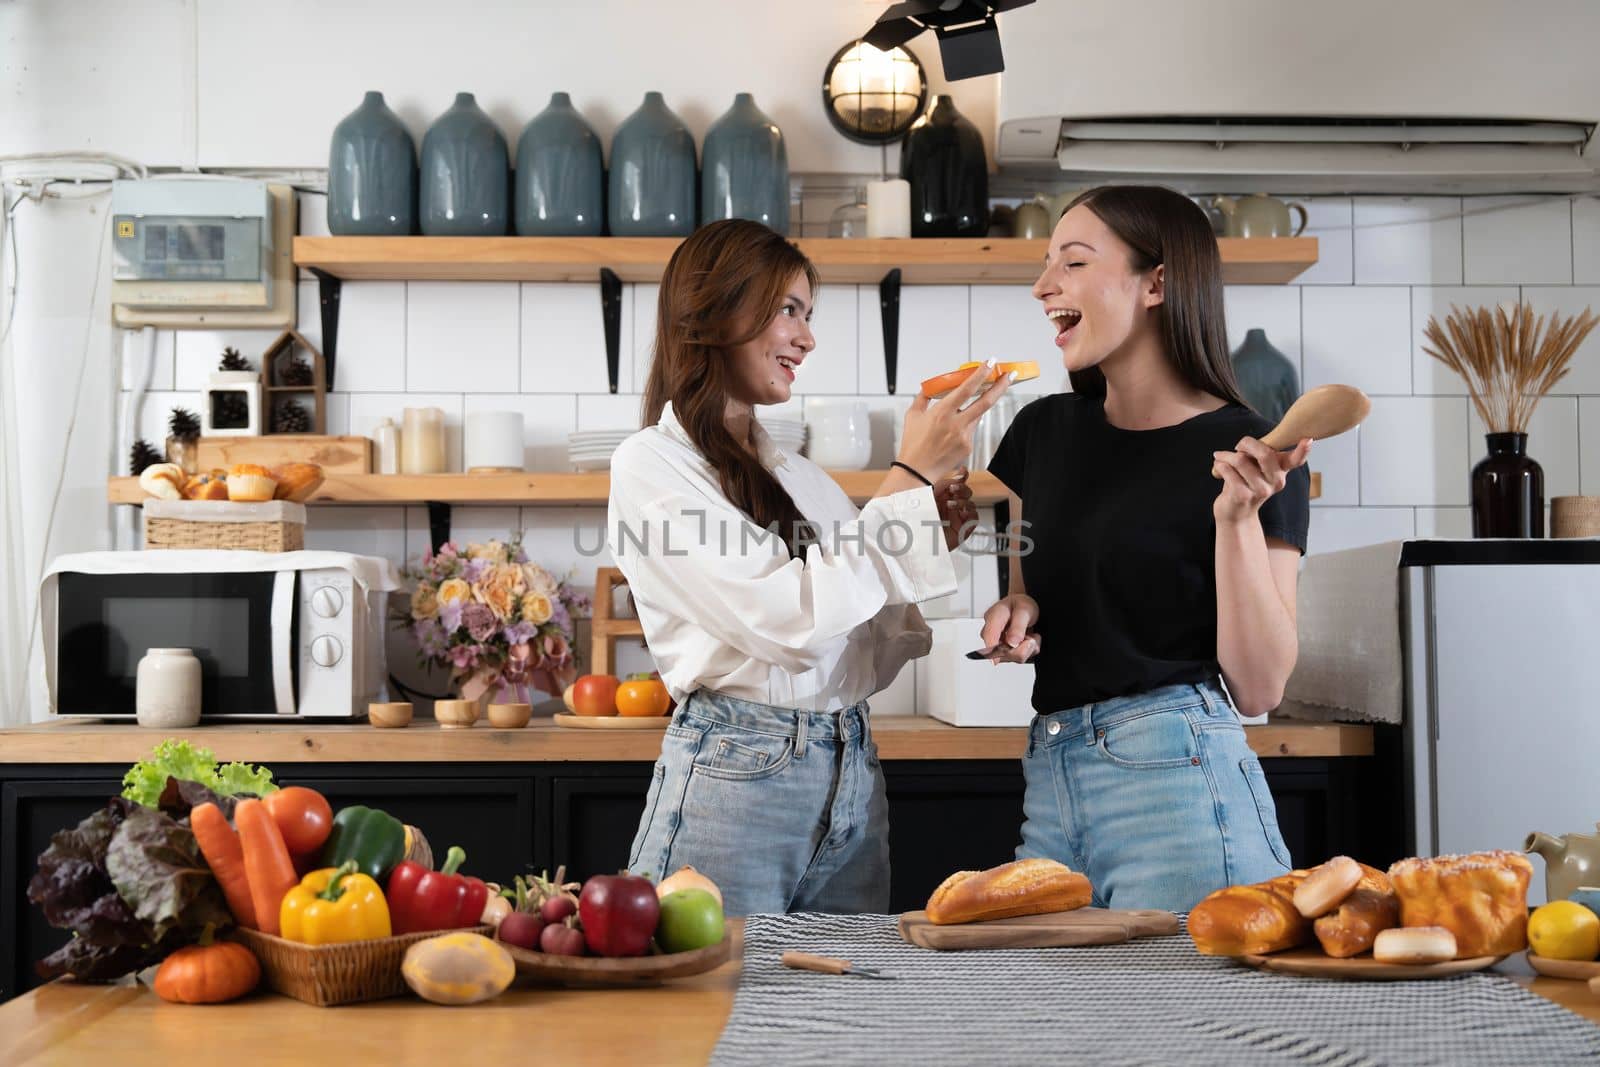 Female and female or LGBT couples are happily cooking bread together with happy smiling face in kitchen at home by wichayada